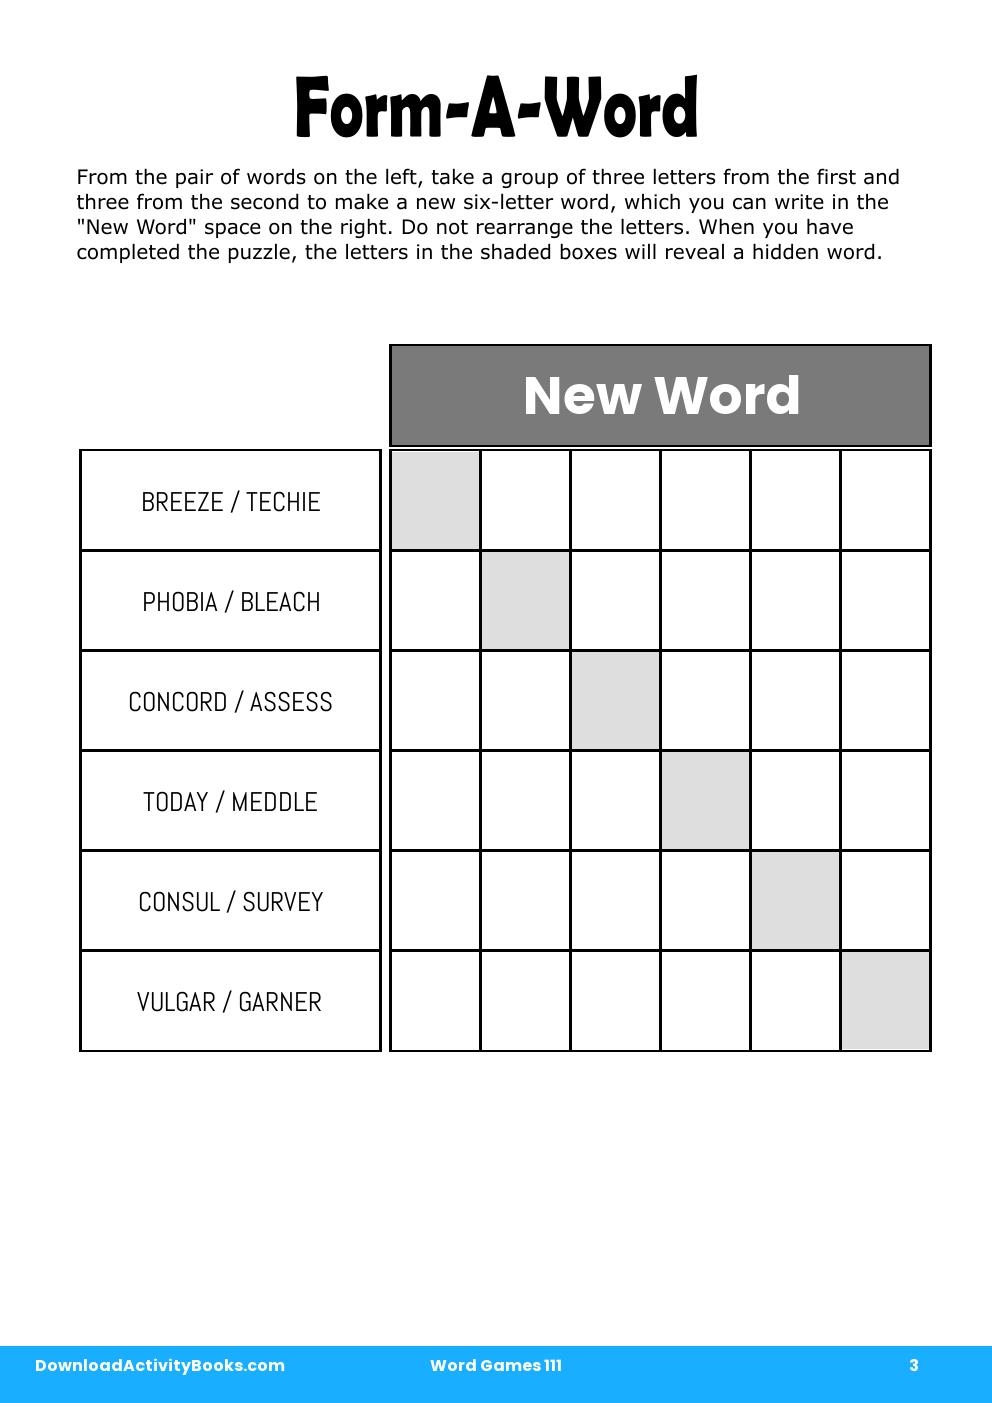 Form-A-Word in Word Games 111